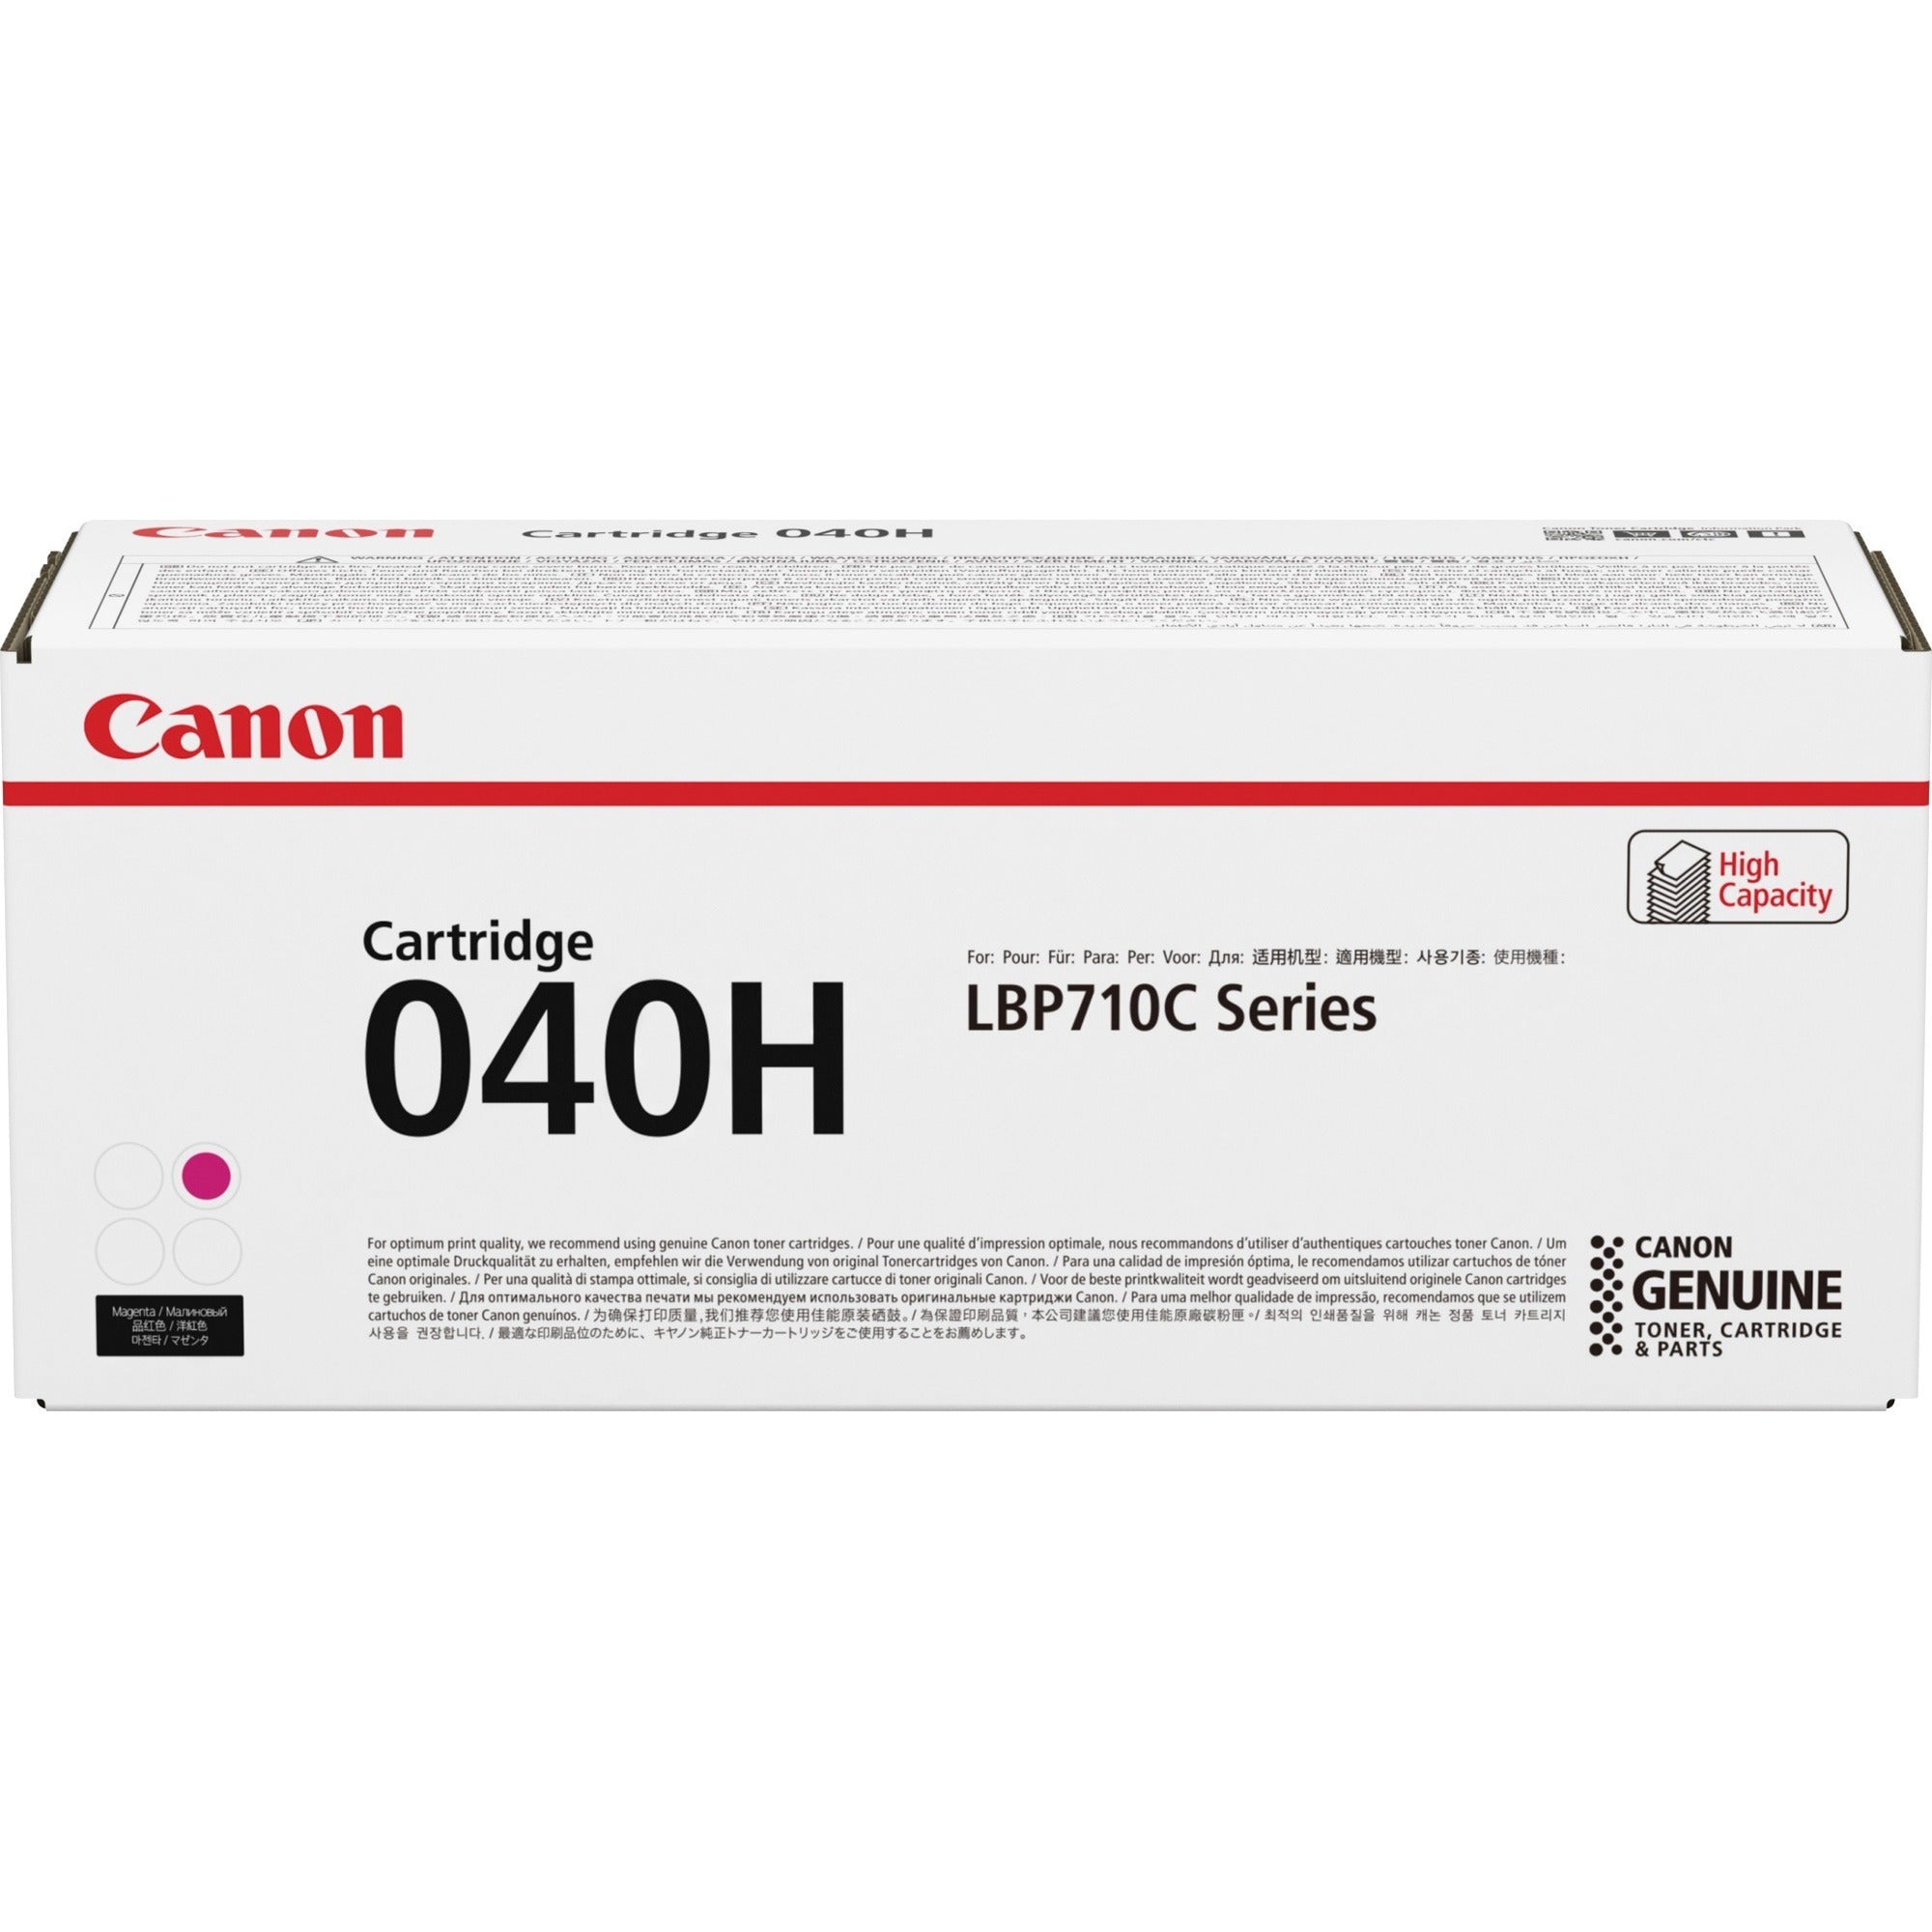 canon-toner-cartridge-laser-high-yield-10000-pages-magenta-1-each_cnmcrtdg040hm - 1